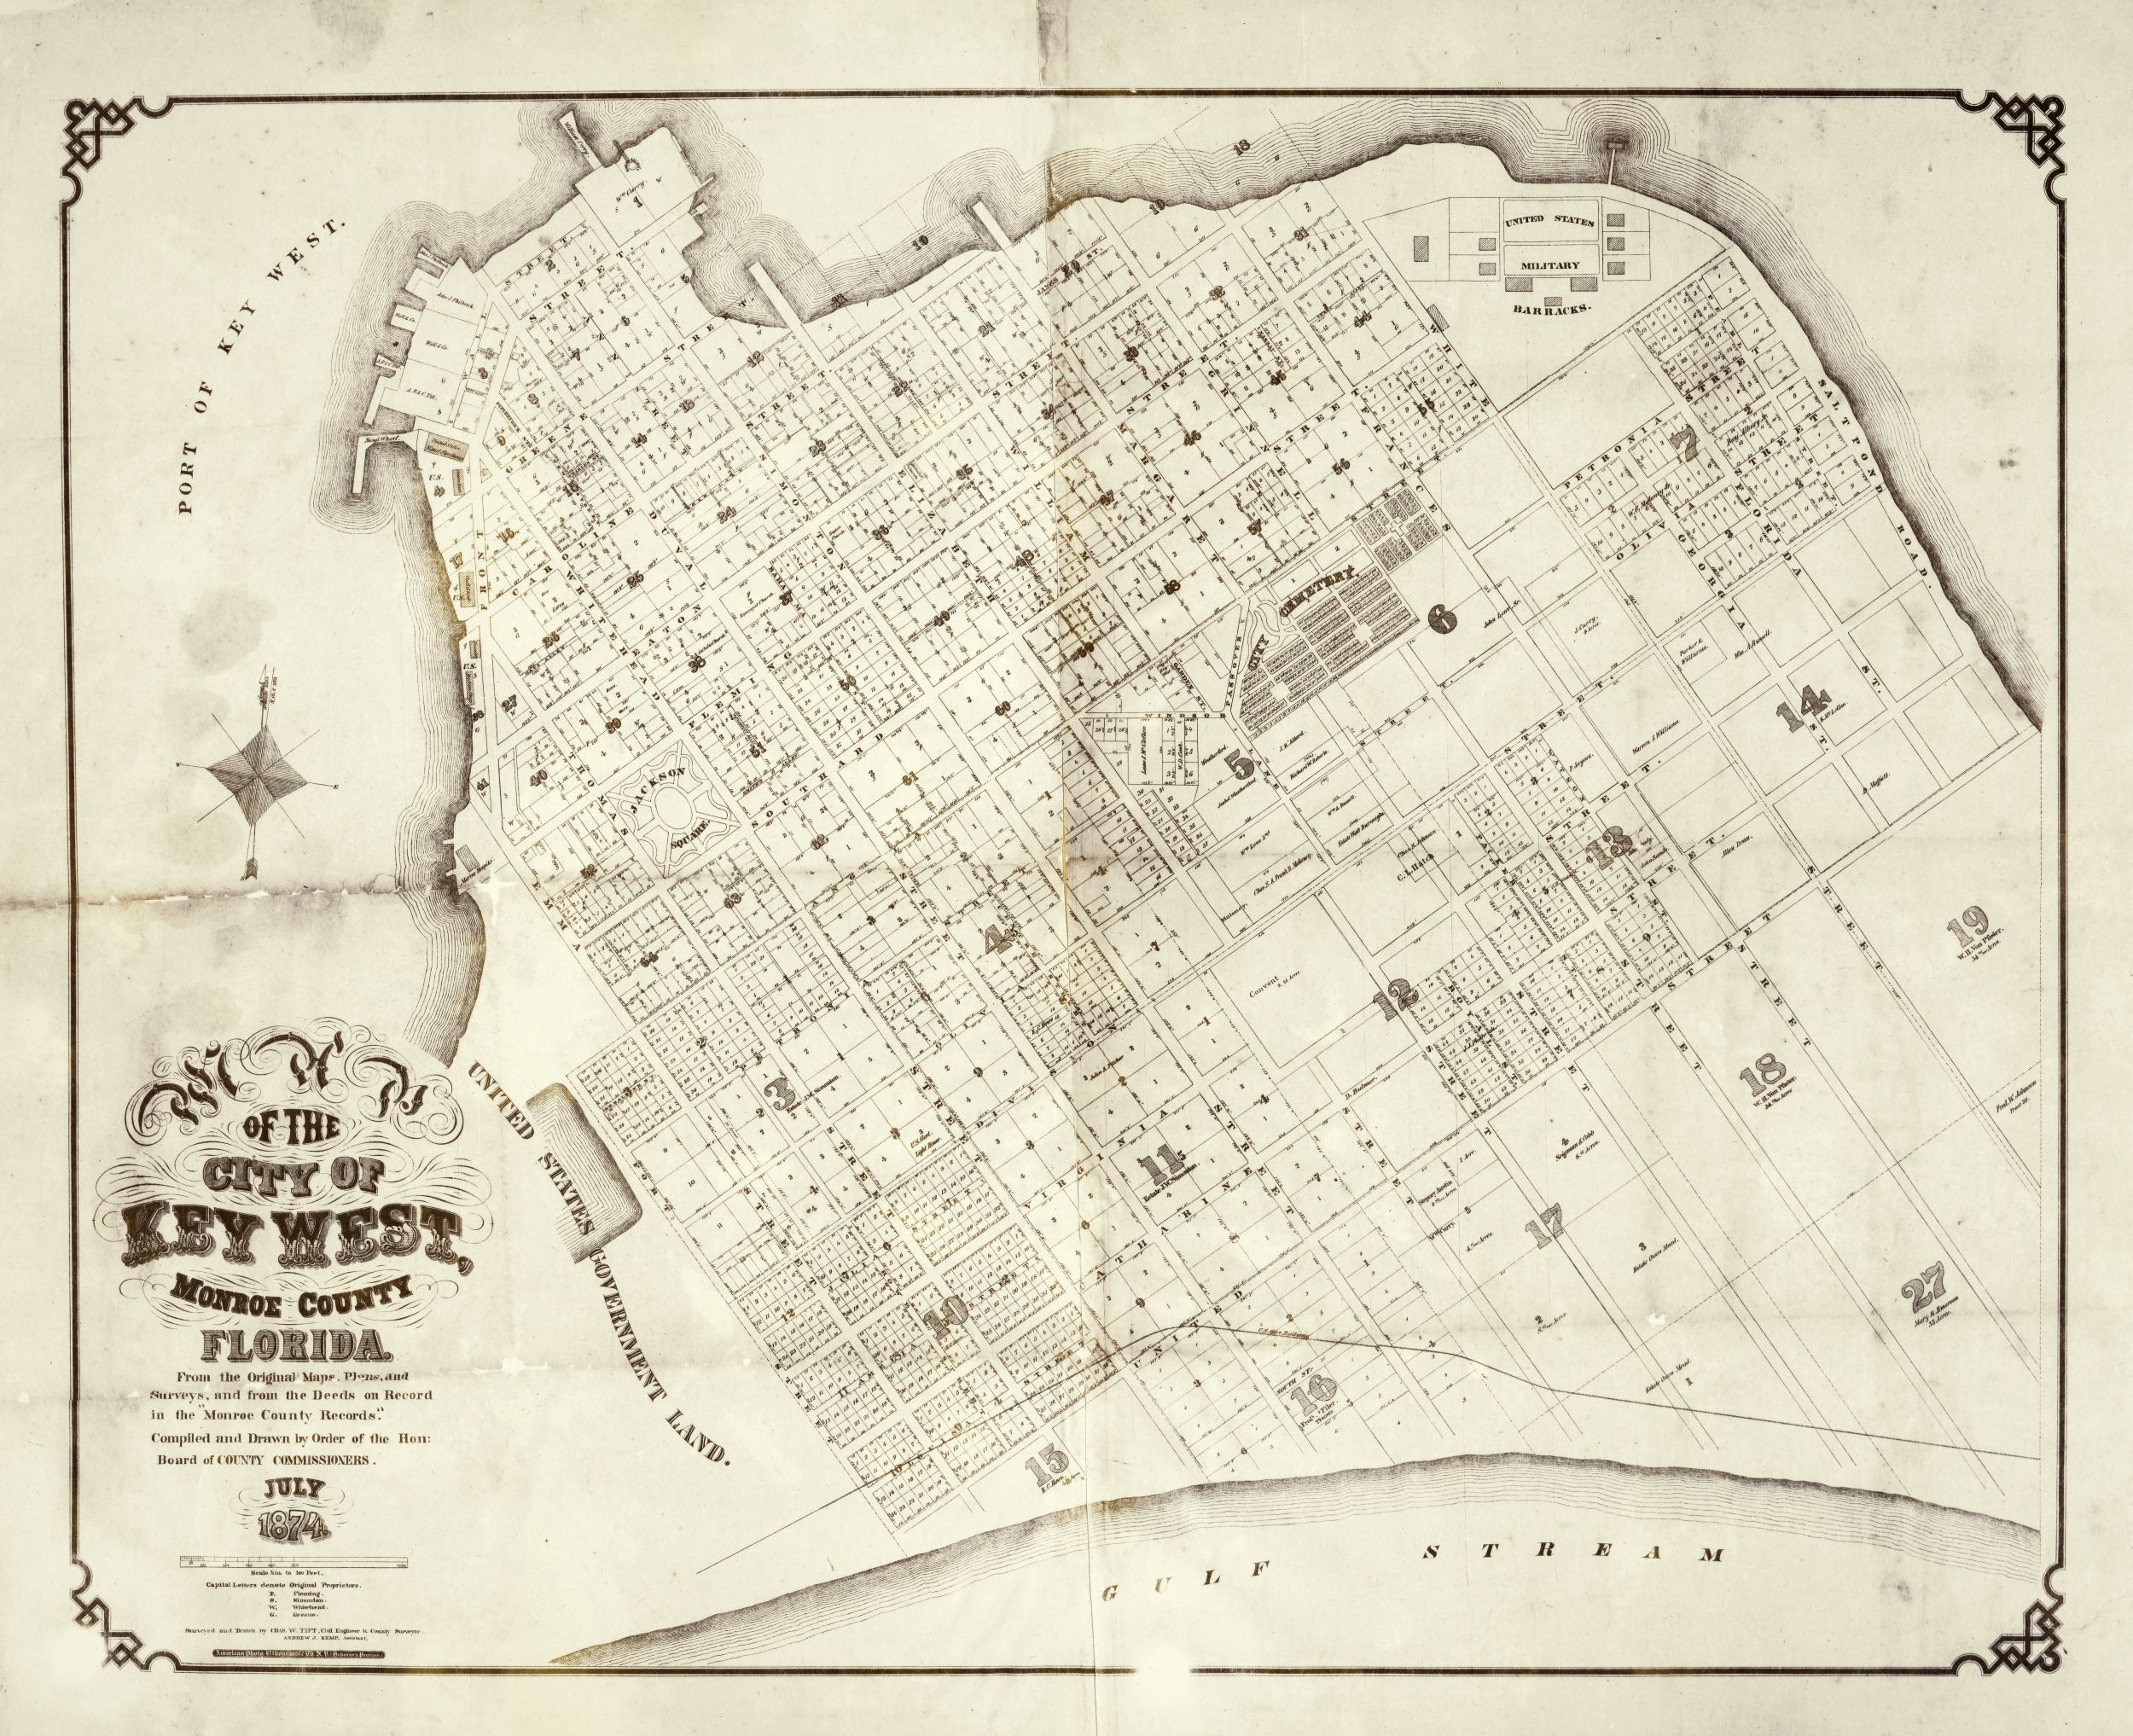 Map of the City of Key West, 1874